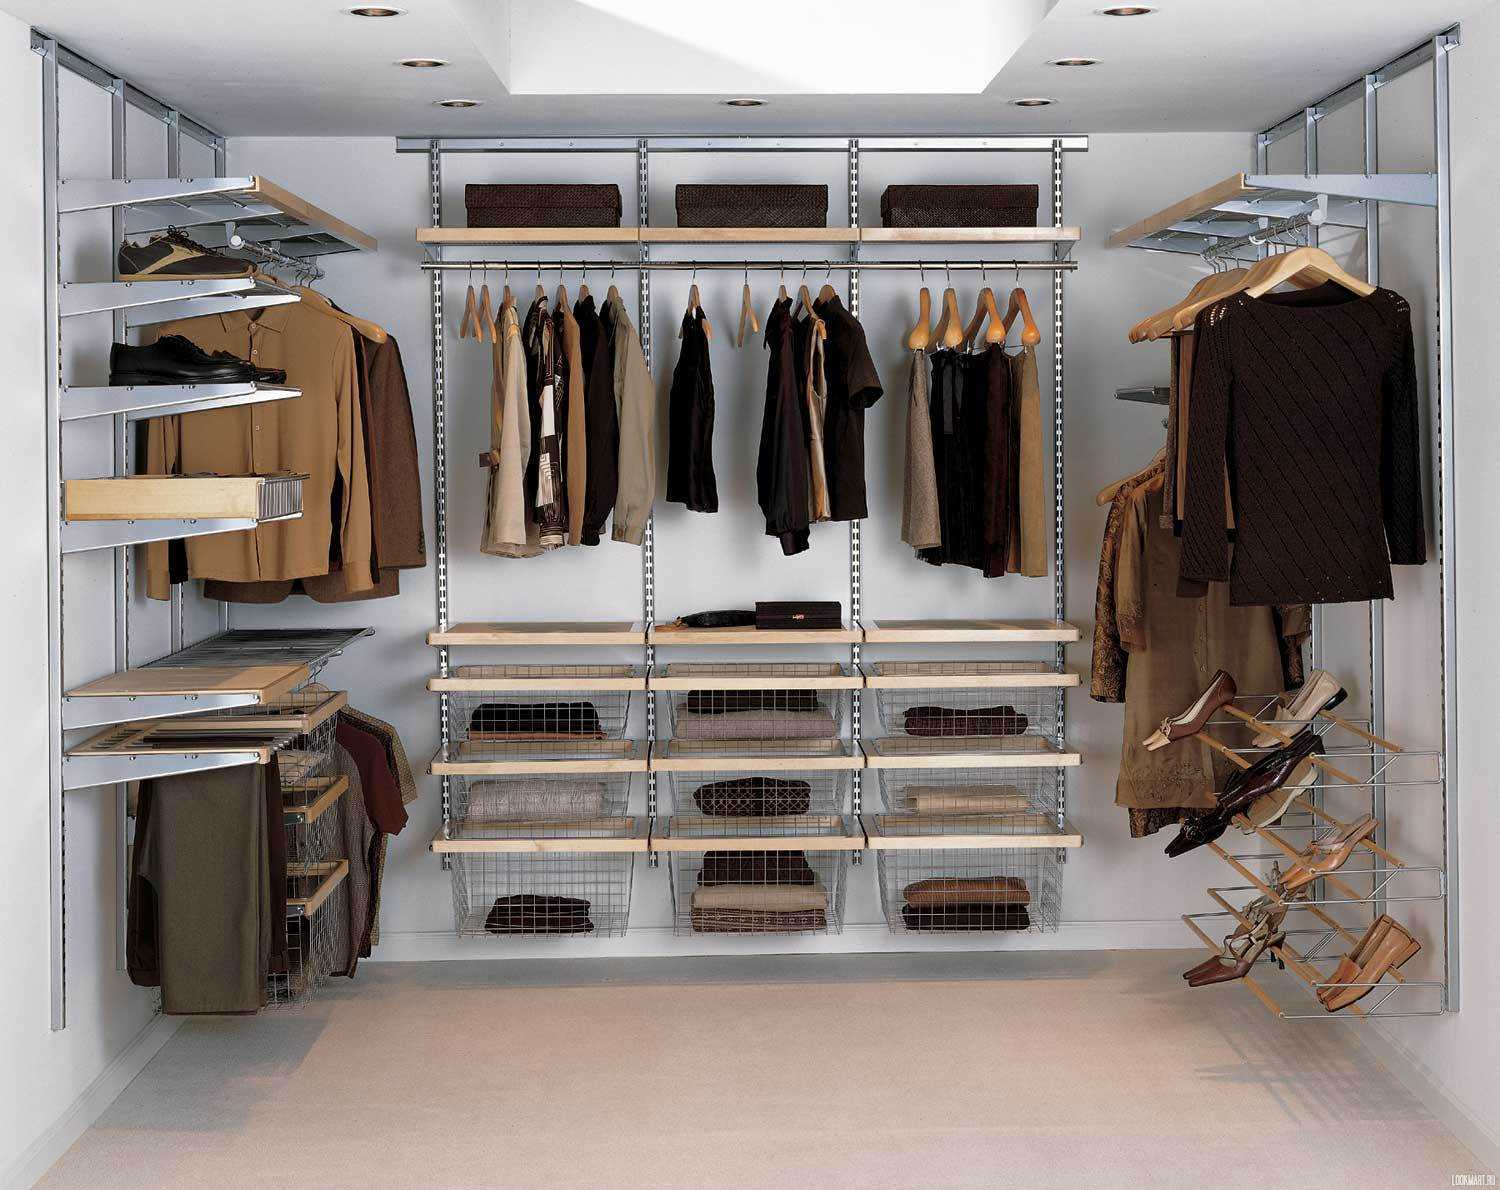 version of the modern style of the dressing room